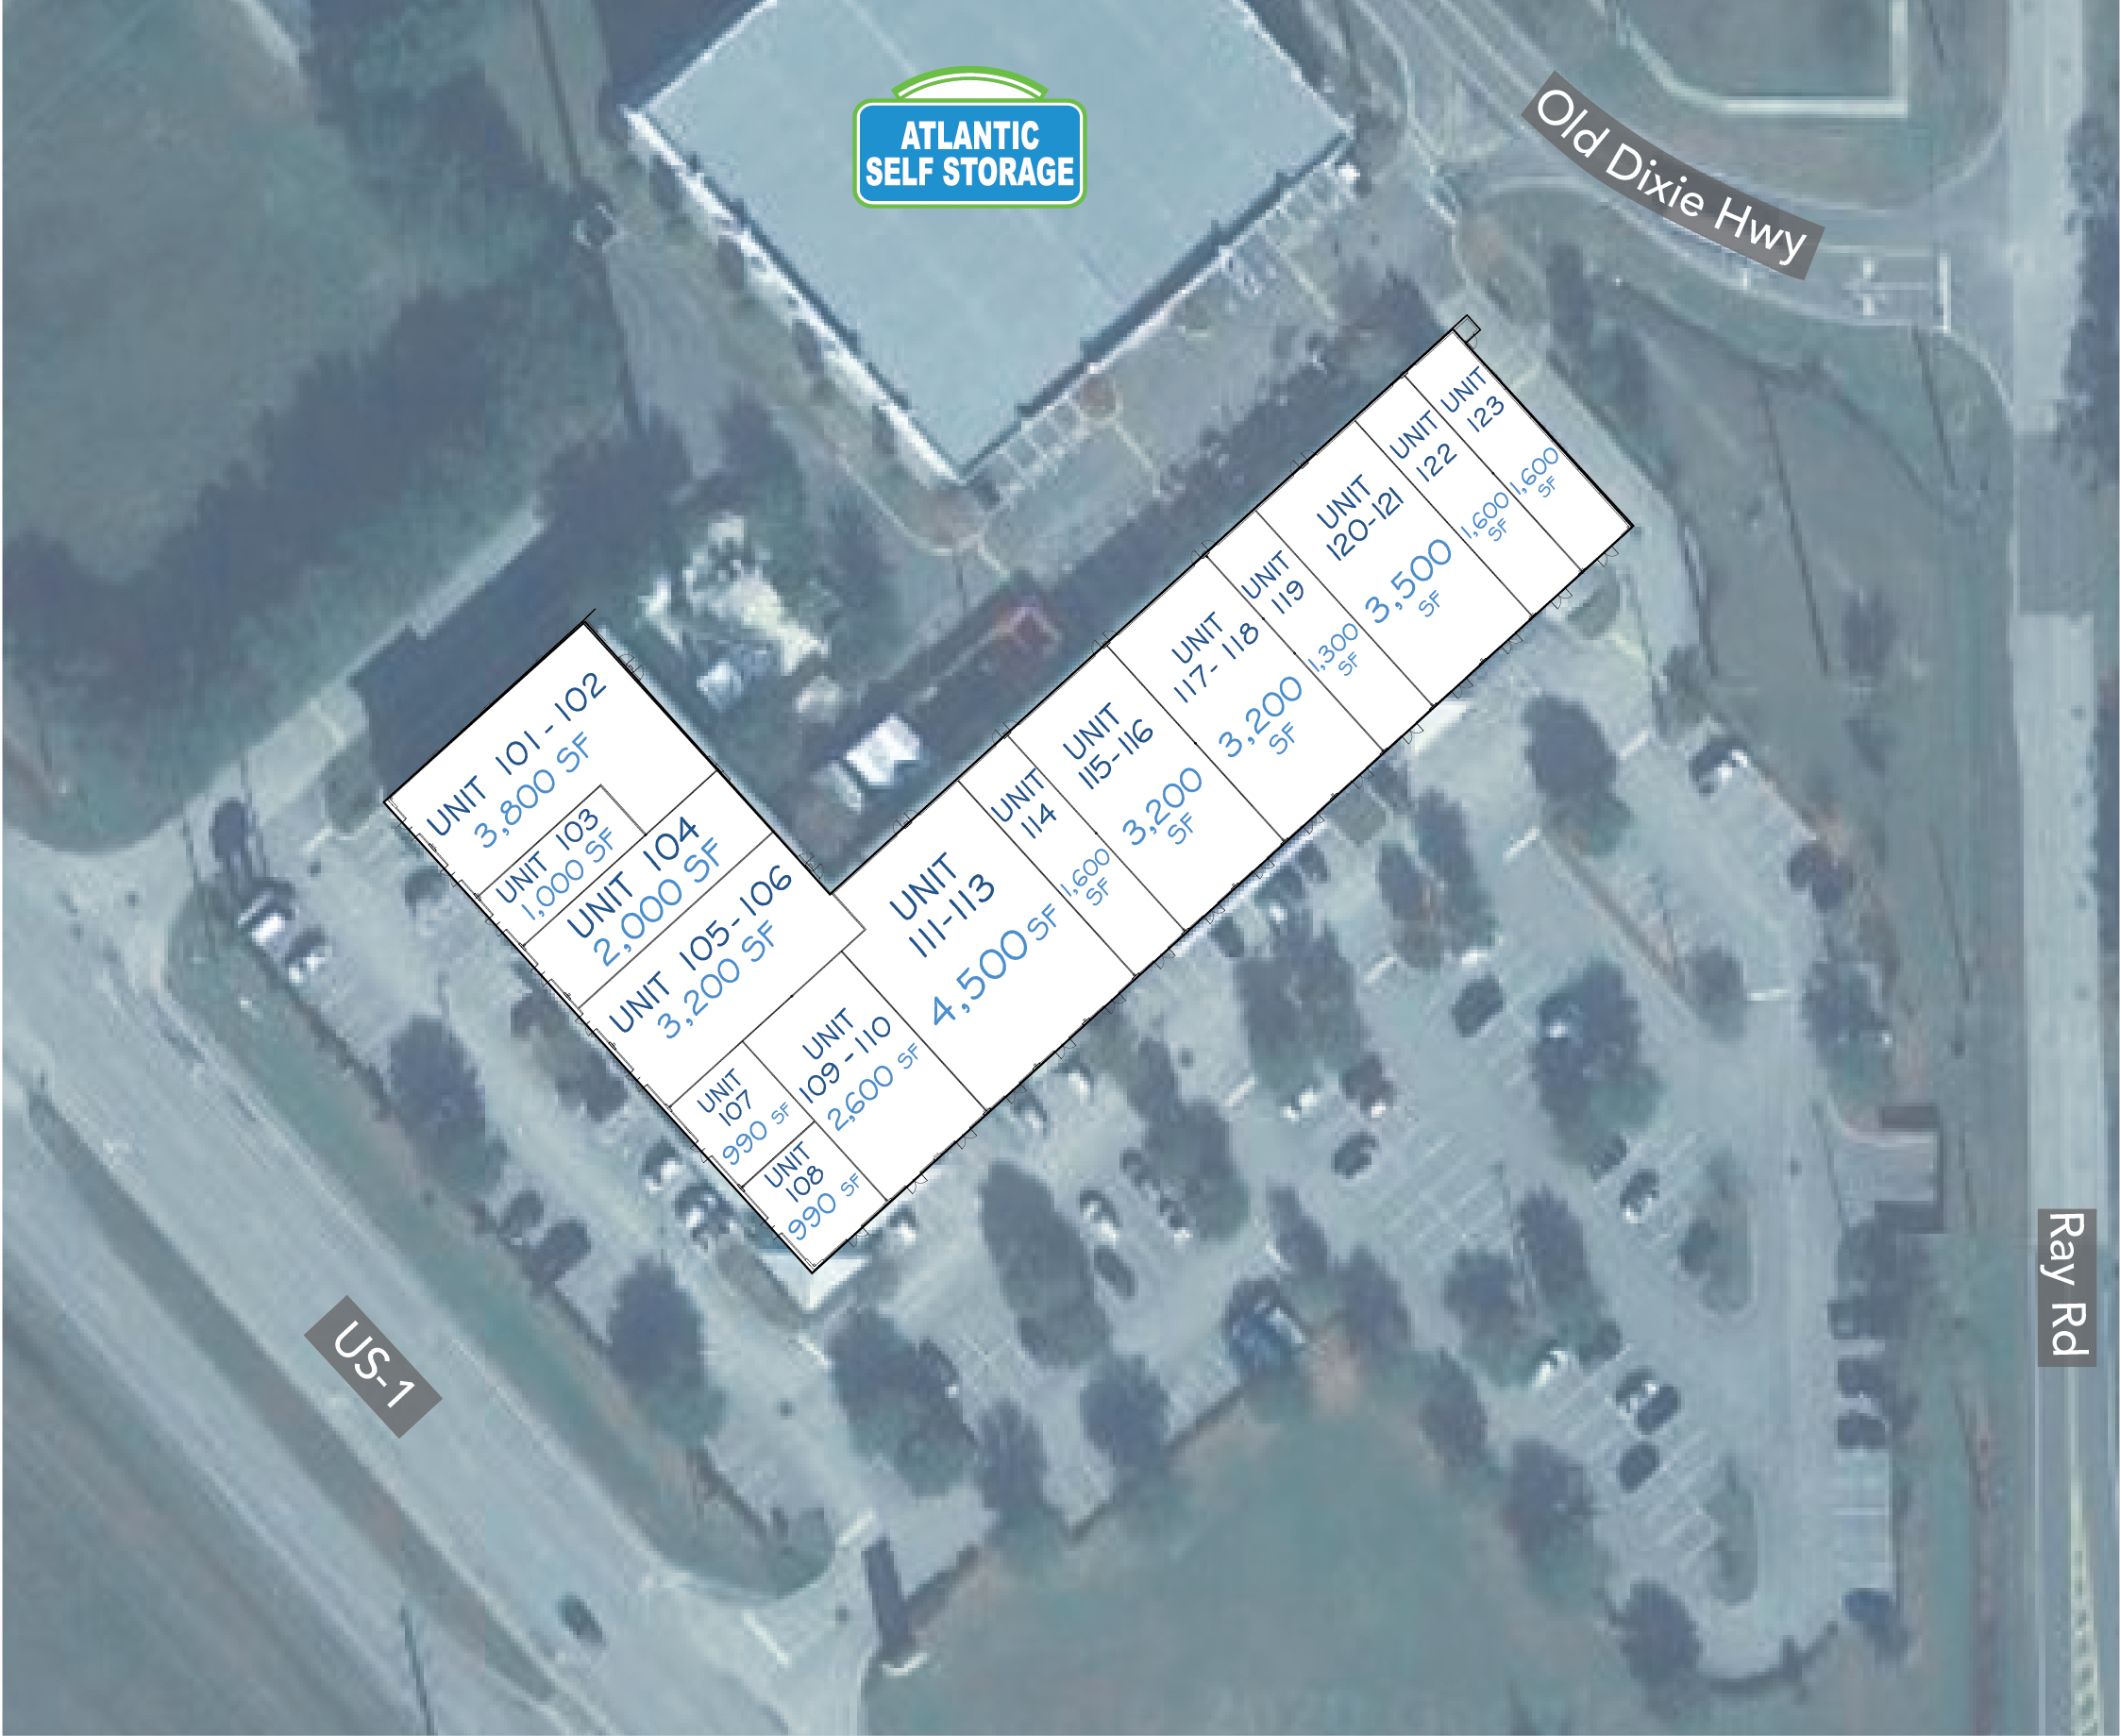 A site map depicting the layout of the property.